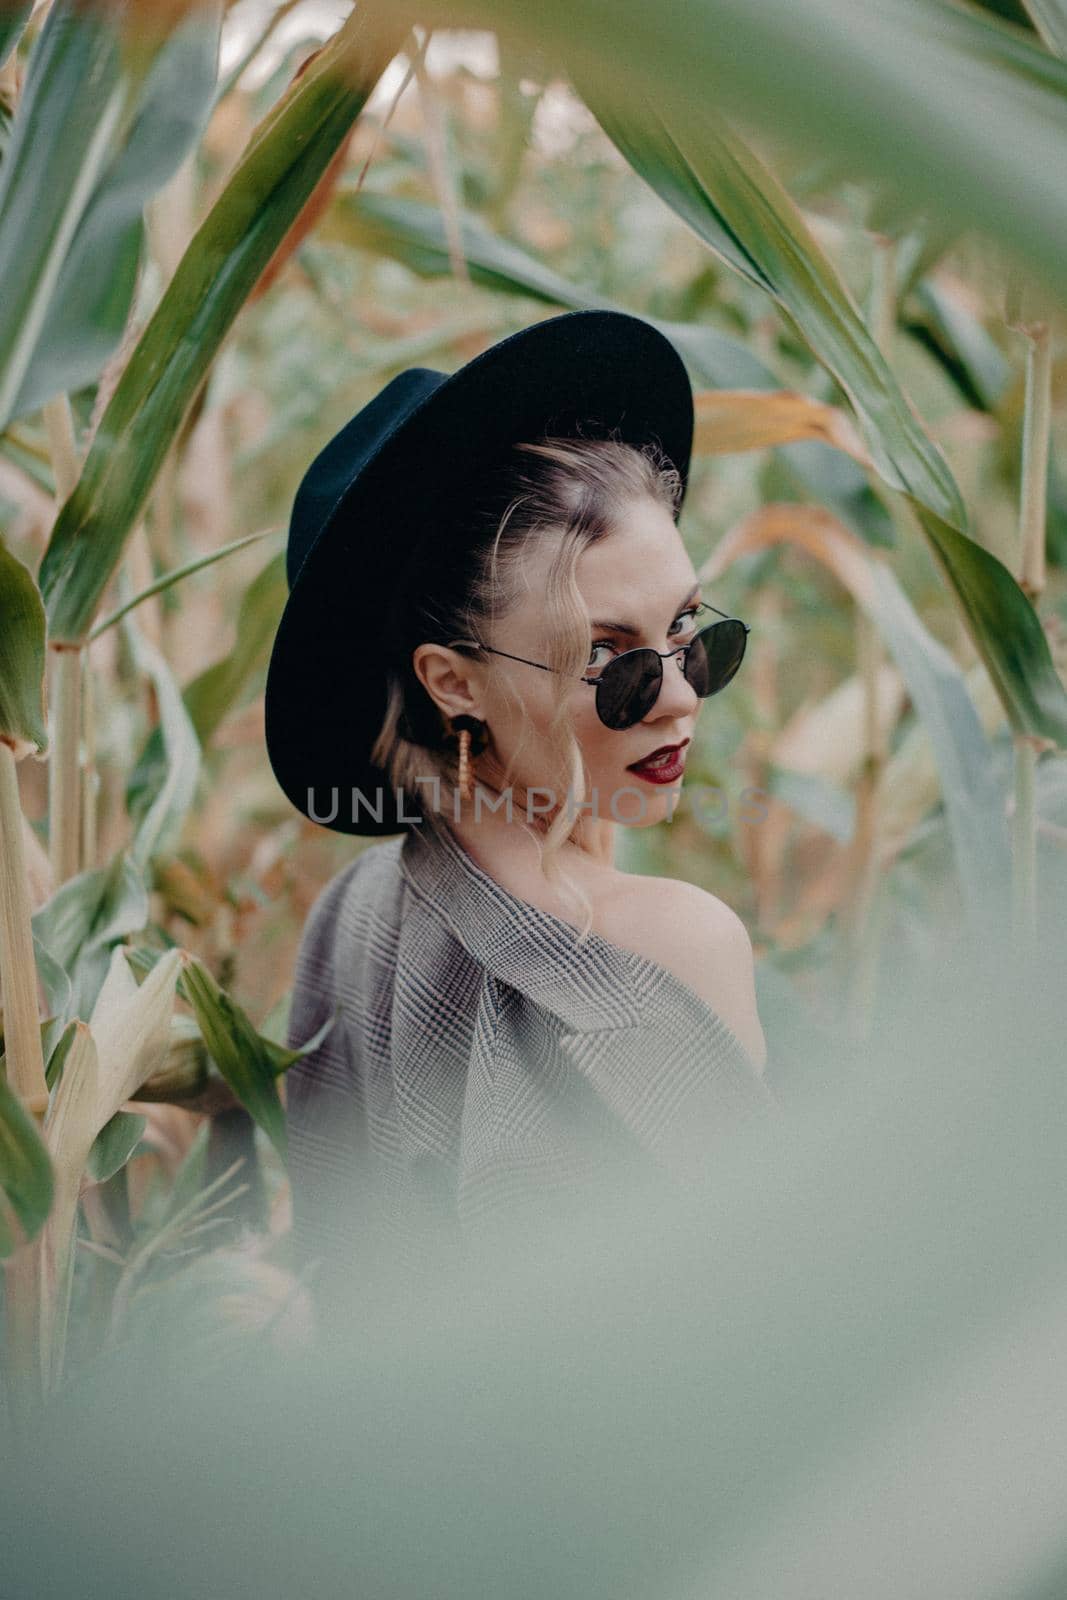 Trendy woman in plaid blazer and hipster hat at corn background. Fashion girl portrait with black sunglasses posing on natural landscape. by kristina_kokhanova